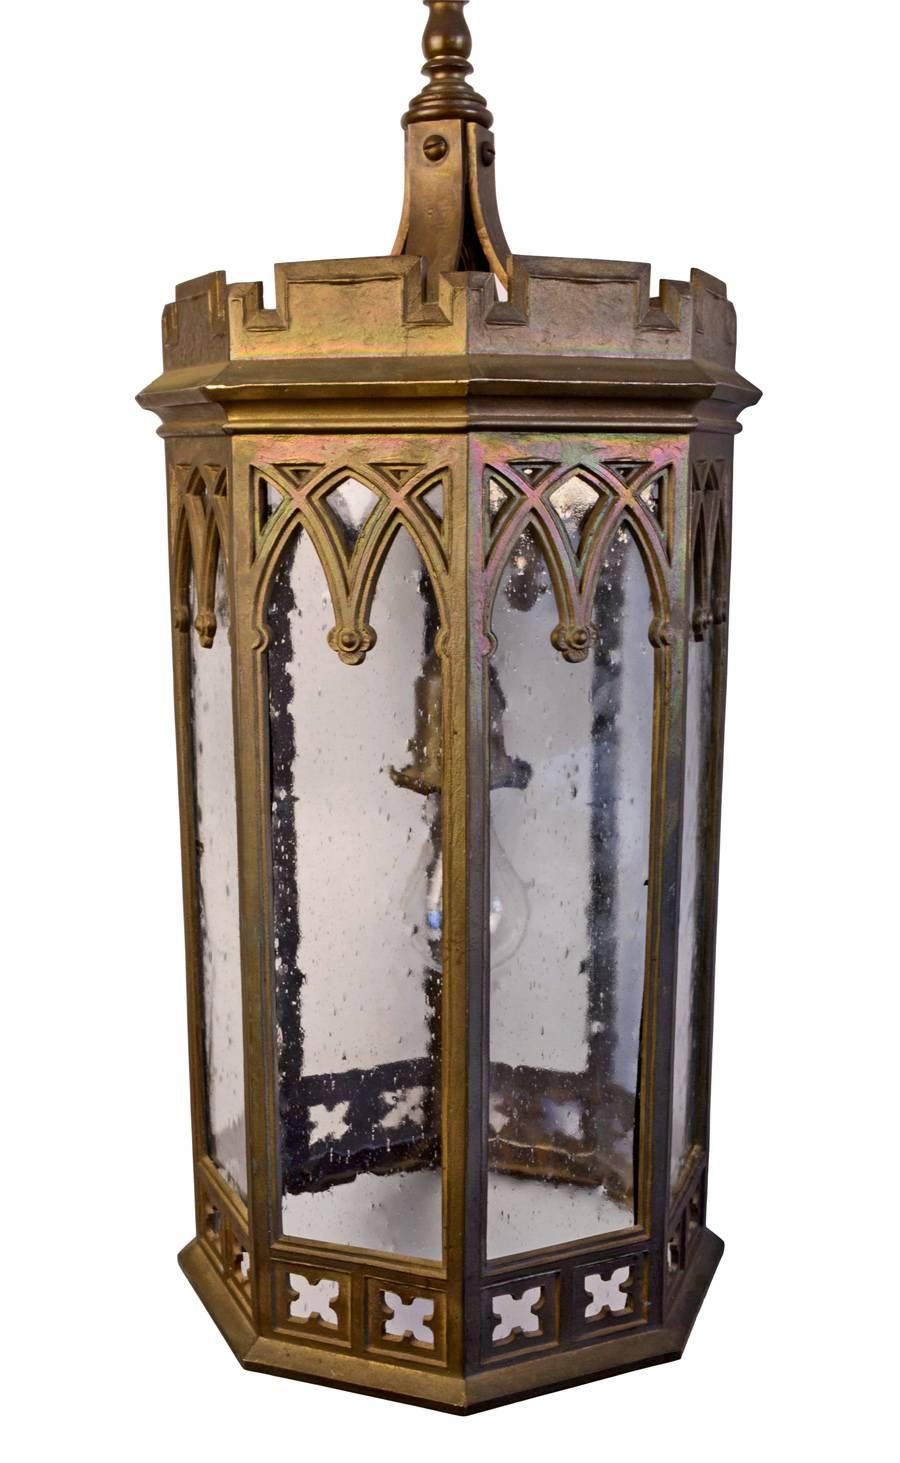 This Gothic revival pendant light from the 19th century was made by the Bradley and Hubbard Manufacturing Company. Formed in 1852, by 1890's, Bradley and Hubbard was known for its high quality and artistic merit. Their products were marketed in